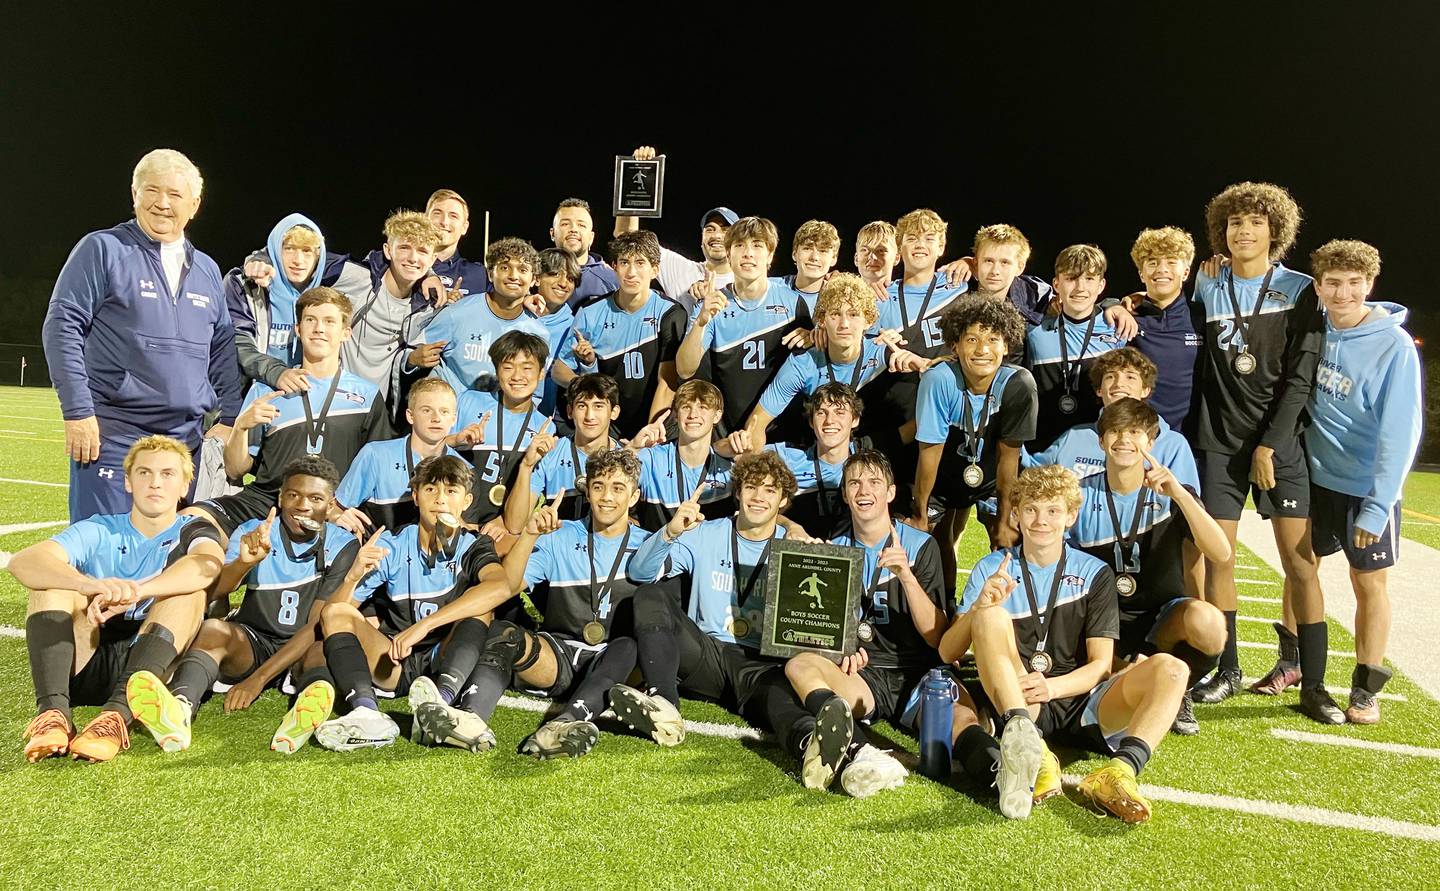 The South River Seahawks are the 2022 Anne Arundel County boys soccer champions after their 3-0 victory over Broadneck in Tuesday's County title game.